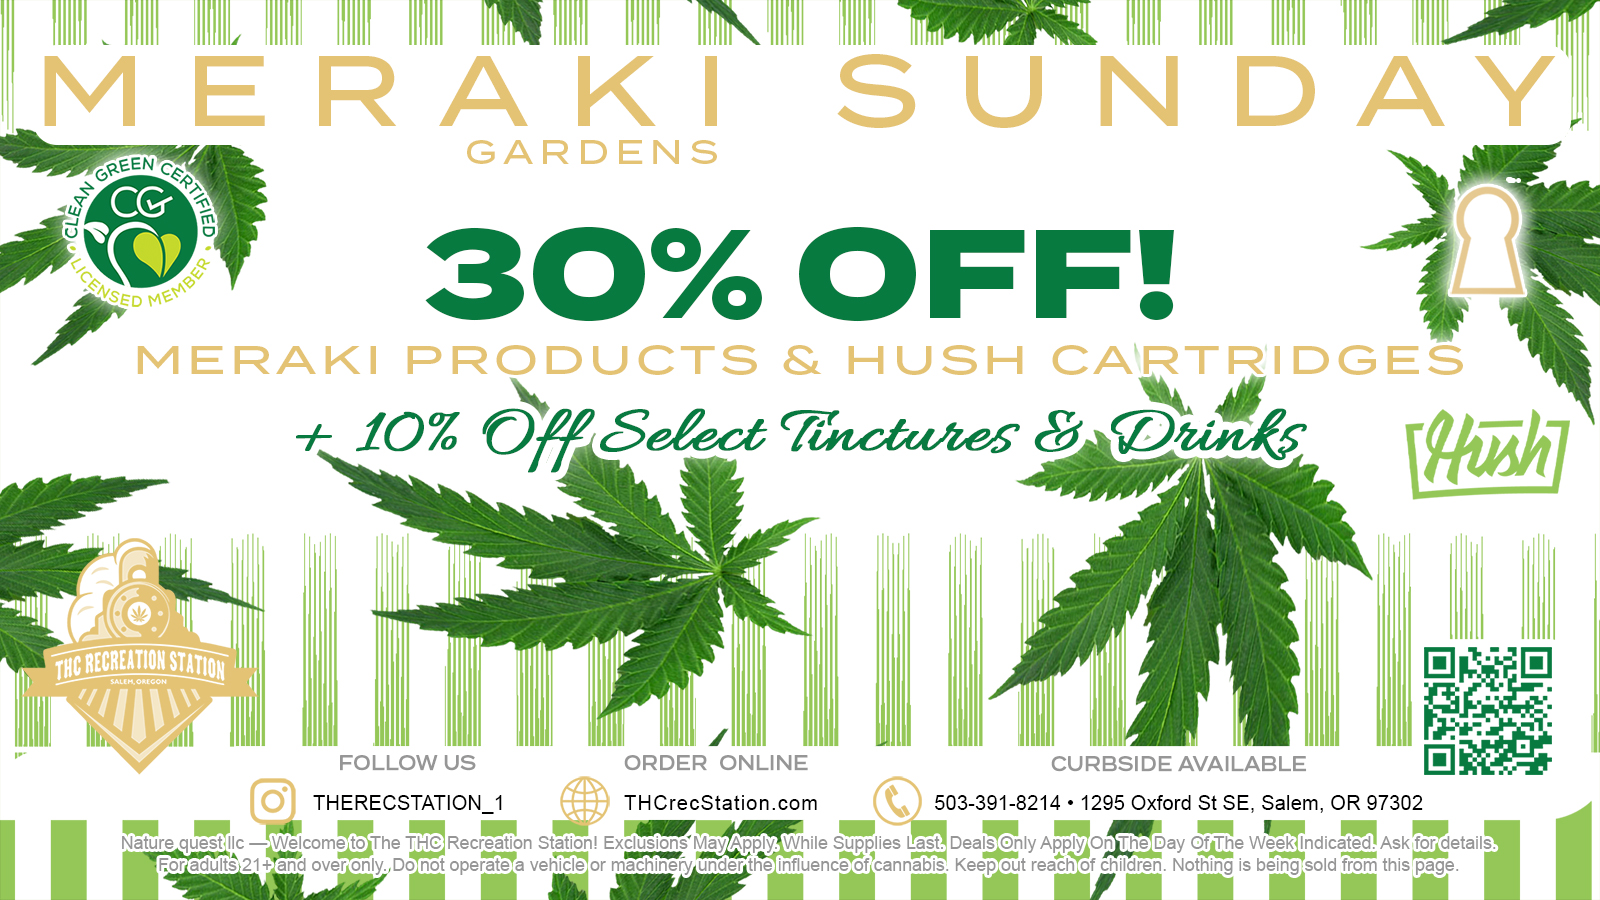 Meraki Gardens Sundays Sale - All Meraki Gardens & HUSH flavored and strain specific carts are 30% Off on Sundays. Meraki Sundays also means that all of our other tinctures & drinks are 10% Off storewide! Get 3x Stamps for all Meraki brand purchases! Only at the THC Recreation Station - Voted Salem, Oregon's Best Cannabis Dispensary by Leafly!